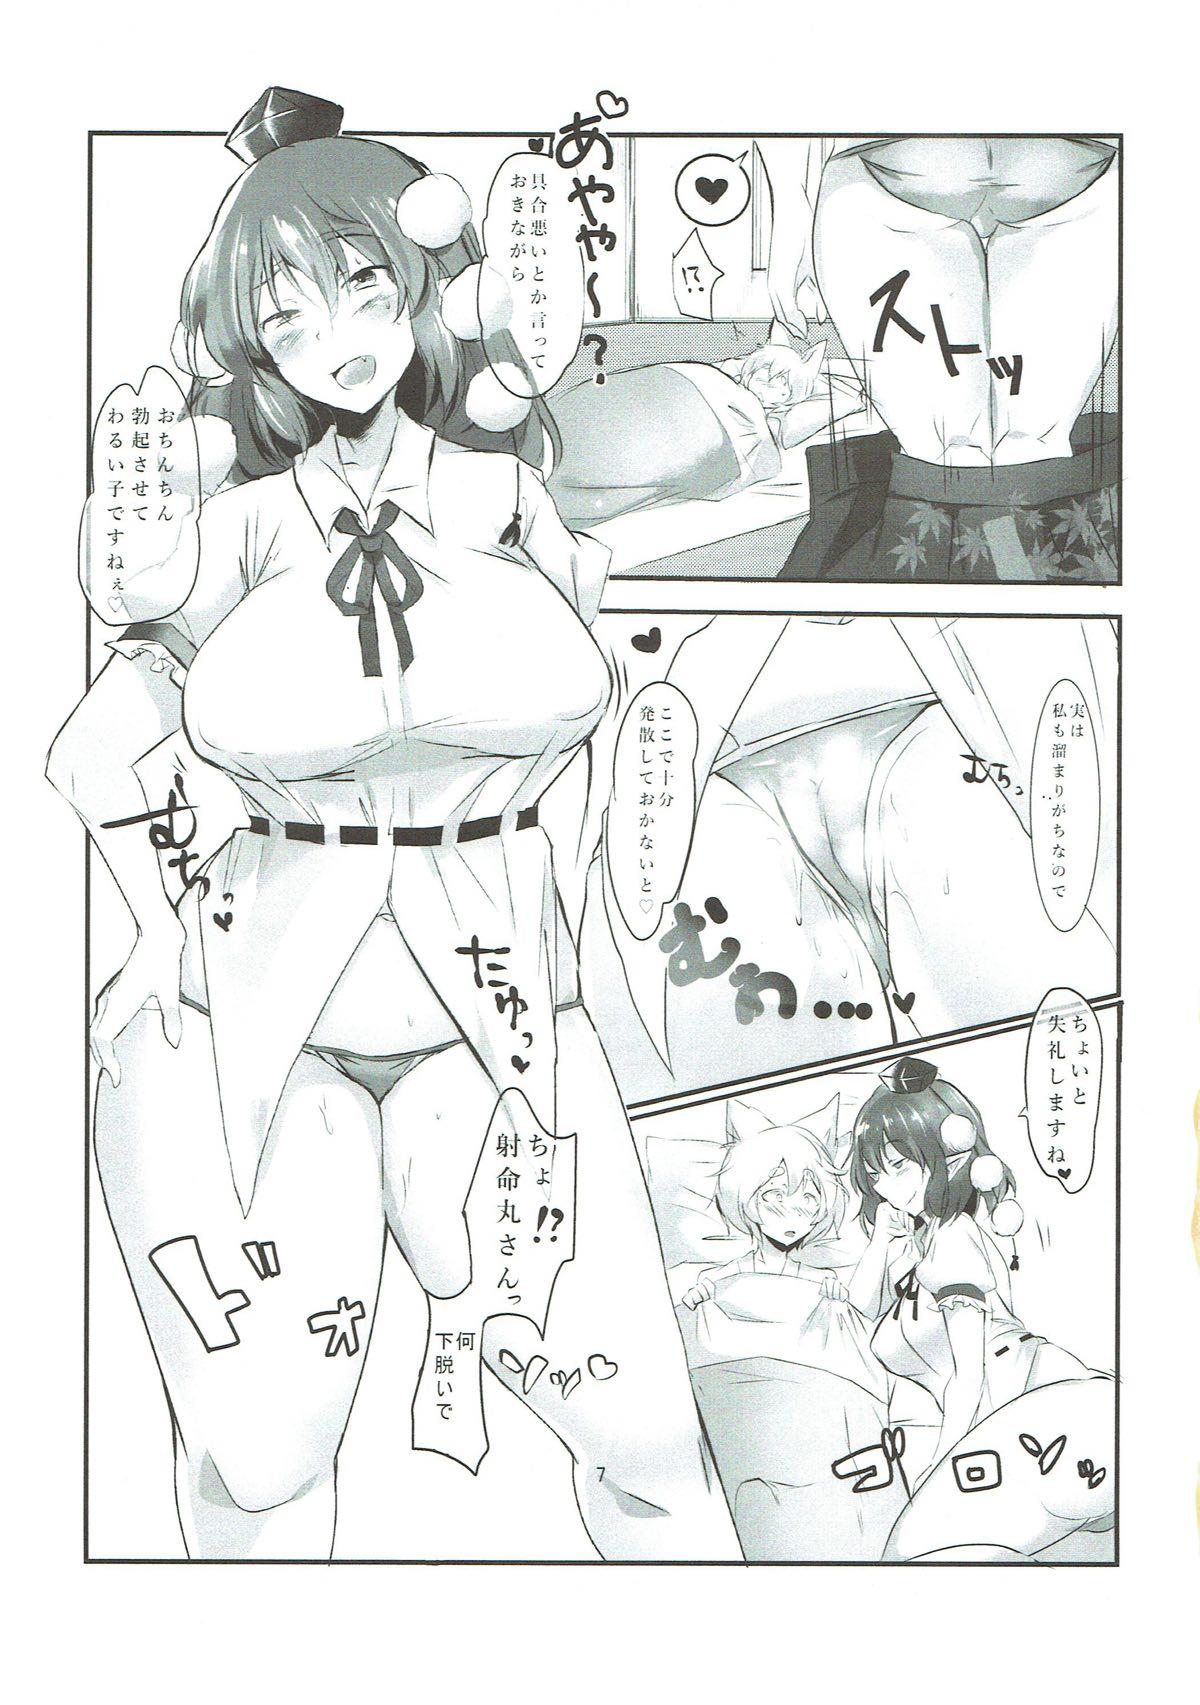 Lezdom あやもみ サンドオーガズム 東方Project - Touhou project Sologirl - Page 8